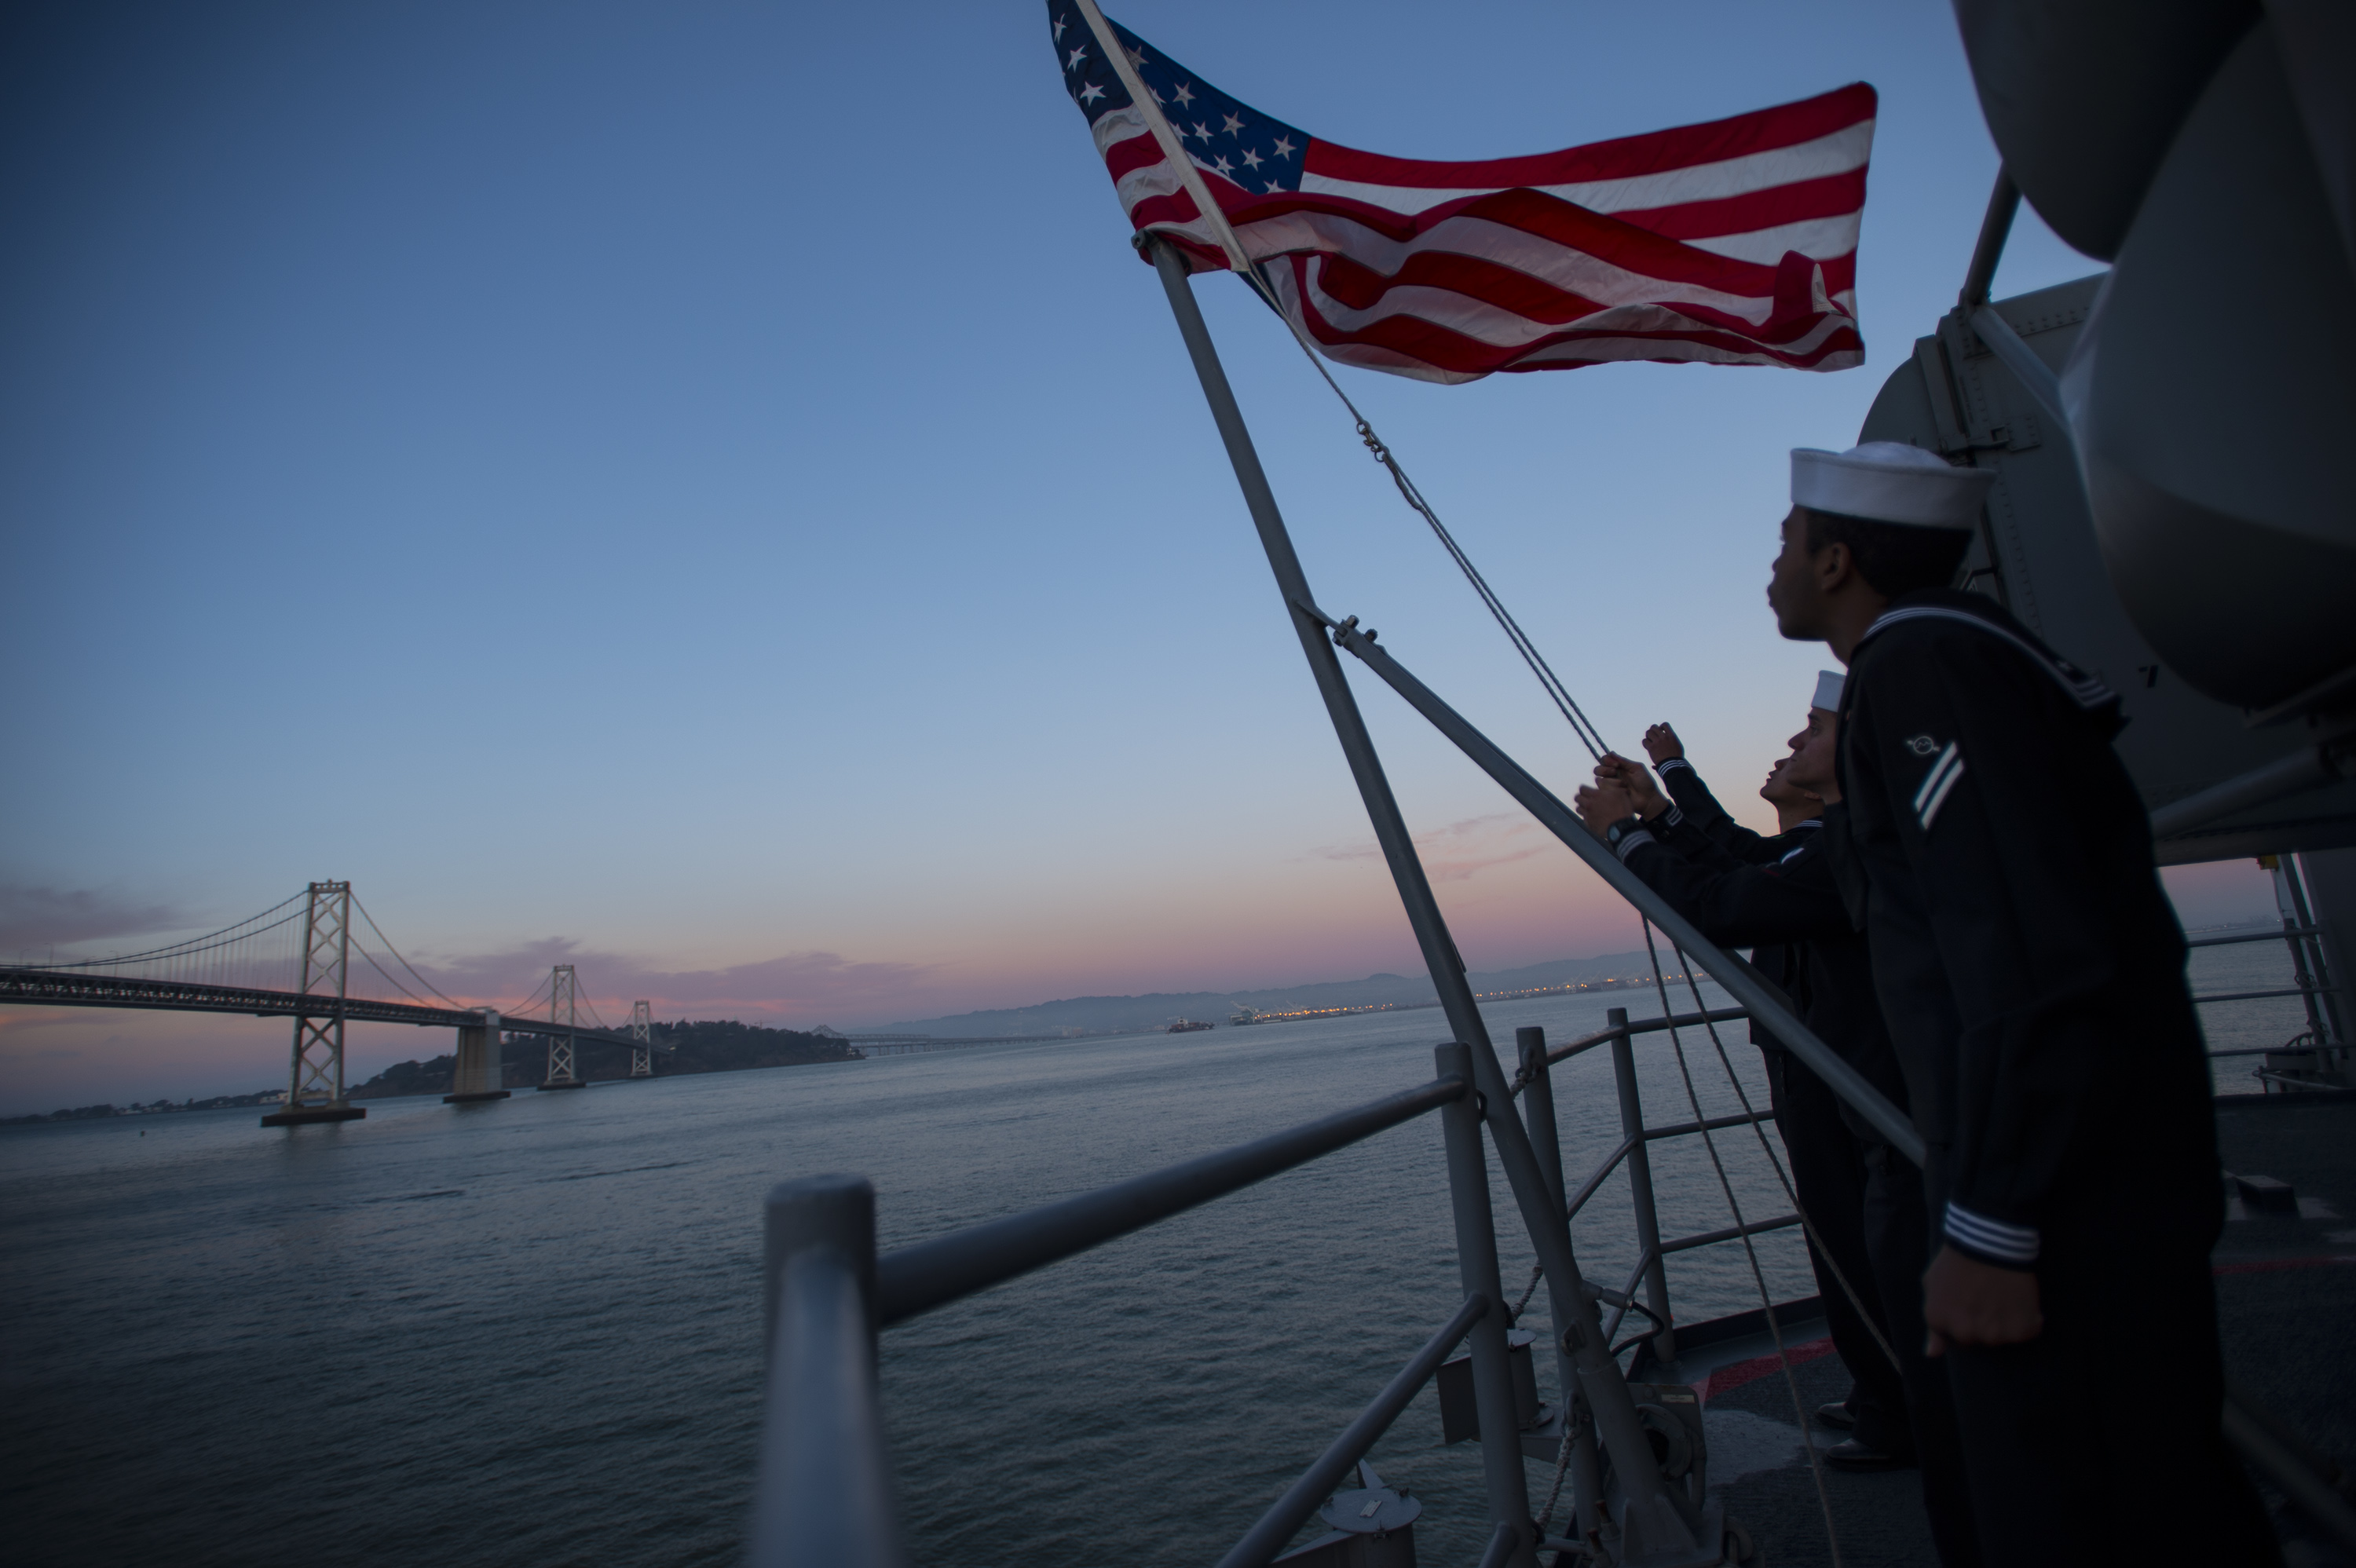 ailors assigned to the future amphibious assault ship USS America (LHA 6) perform evening colors on the ship's fantail while moored in San Francisco Bay. US Navy Photo